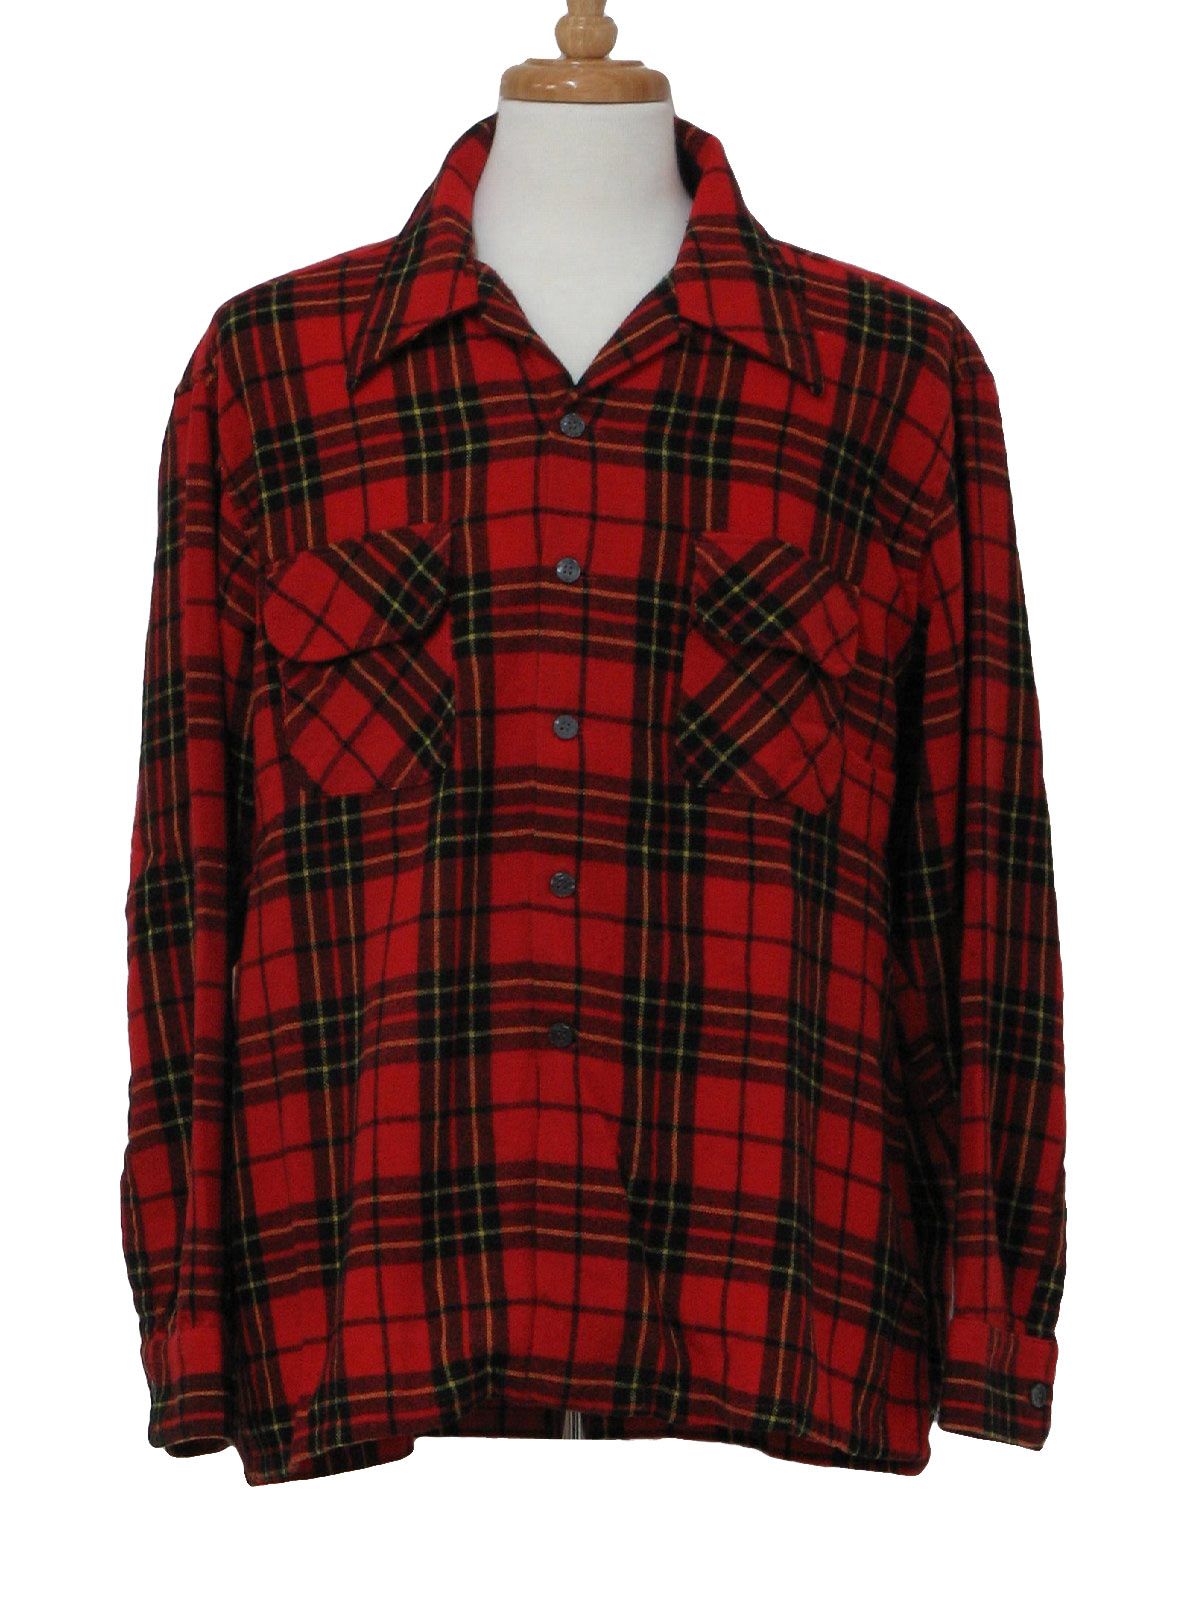 Vintage JC Penney 1970s Wool Shirt: 70s -JC Penney- Mens red, black and ...